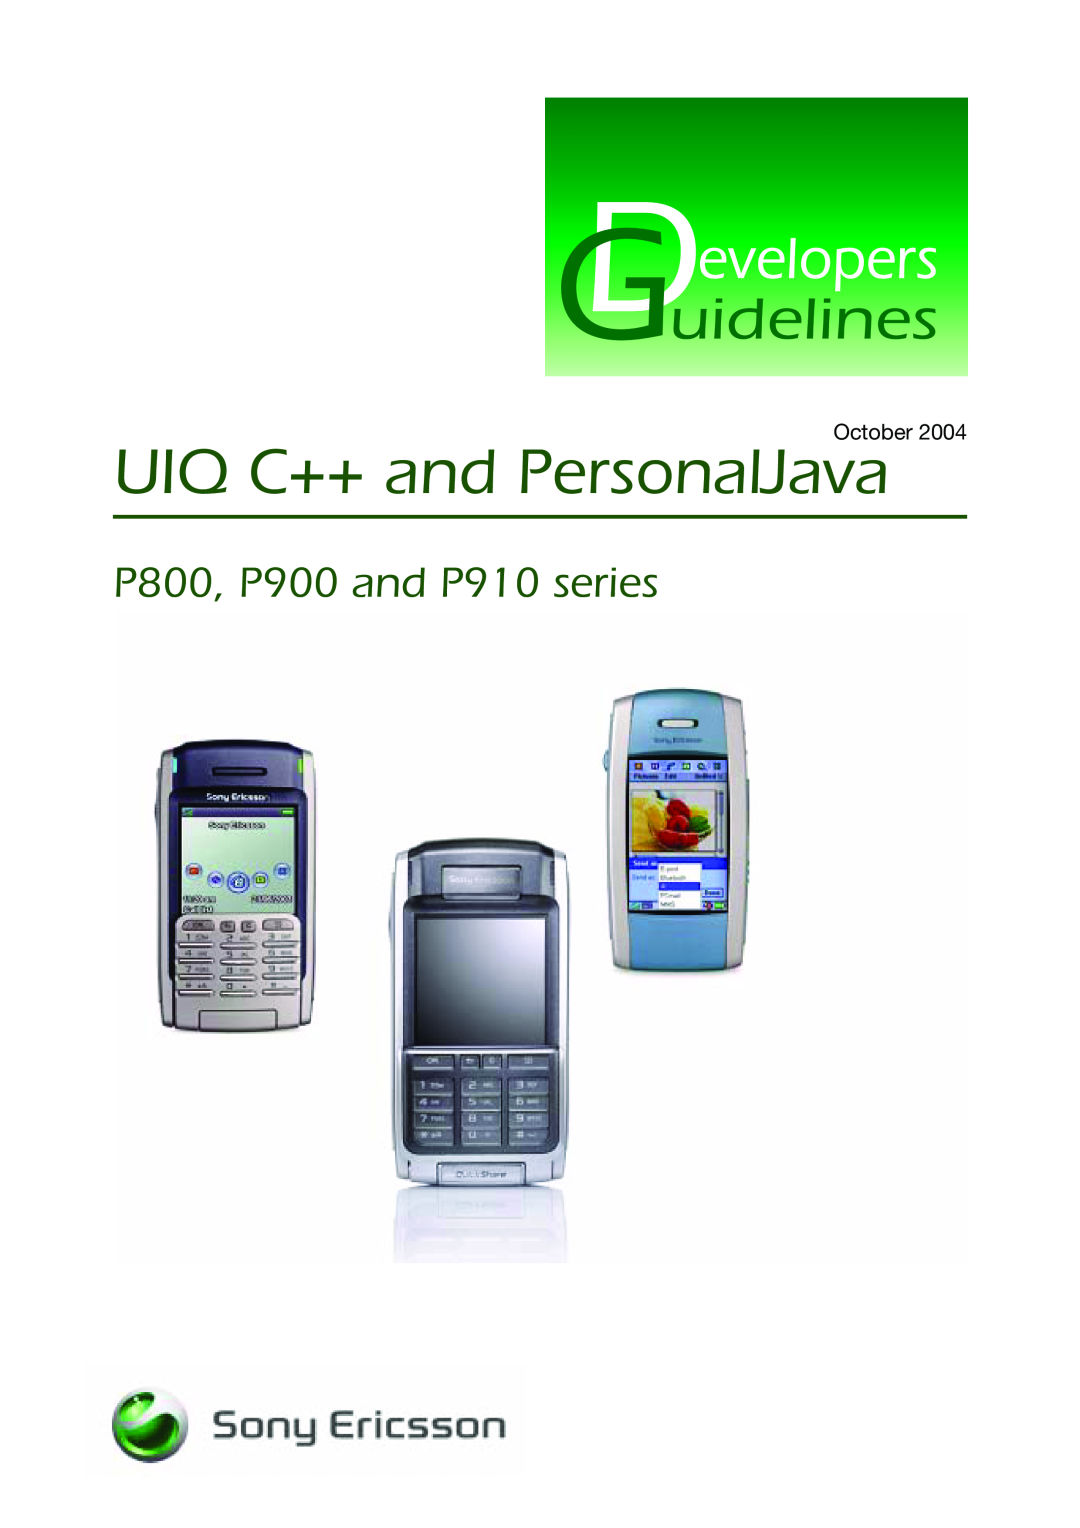 Sony Ericsson manual UIQ C++ and PersonalJava, P800, P900 and P910 series, October 